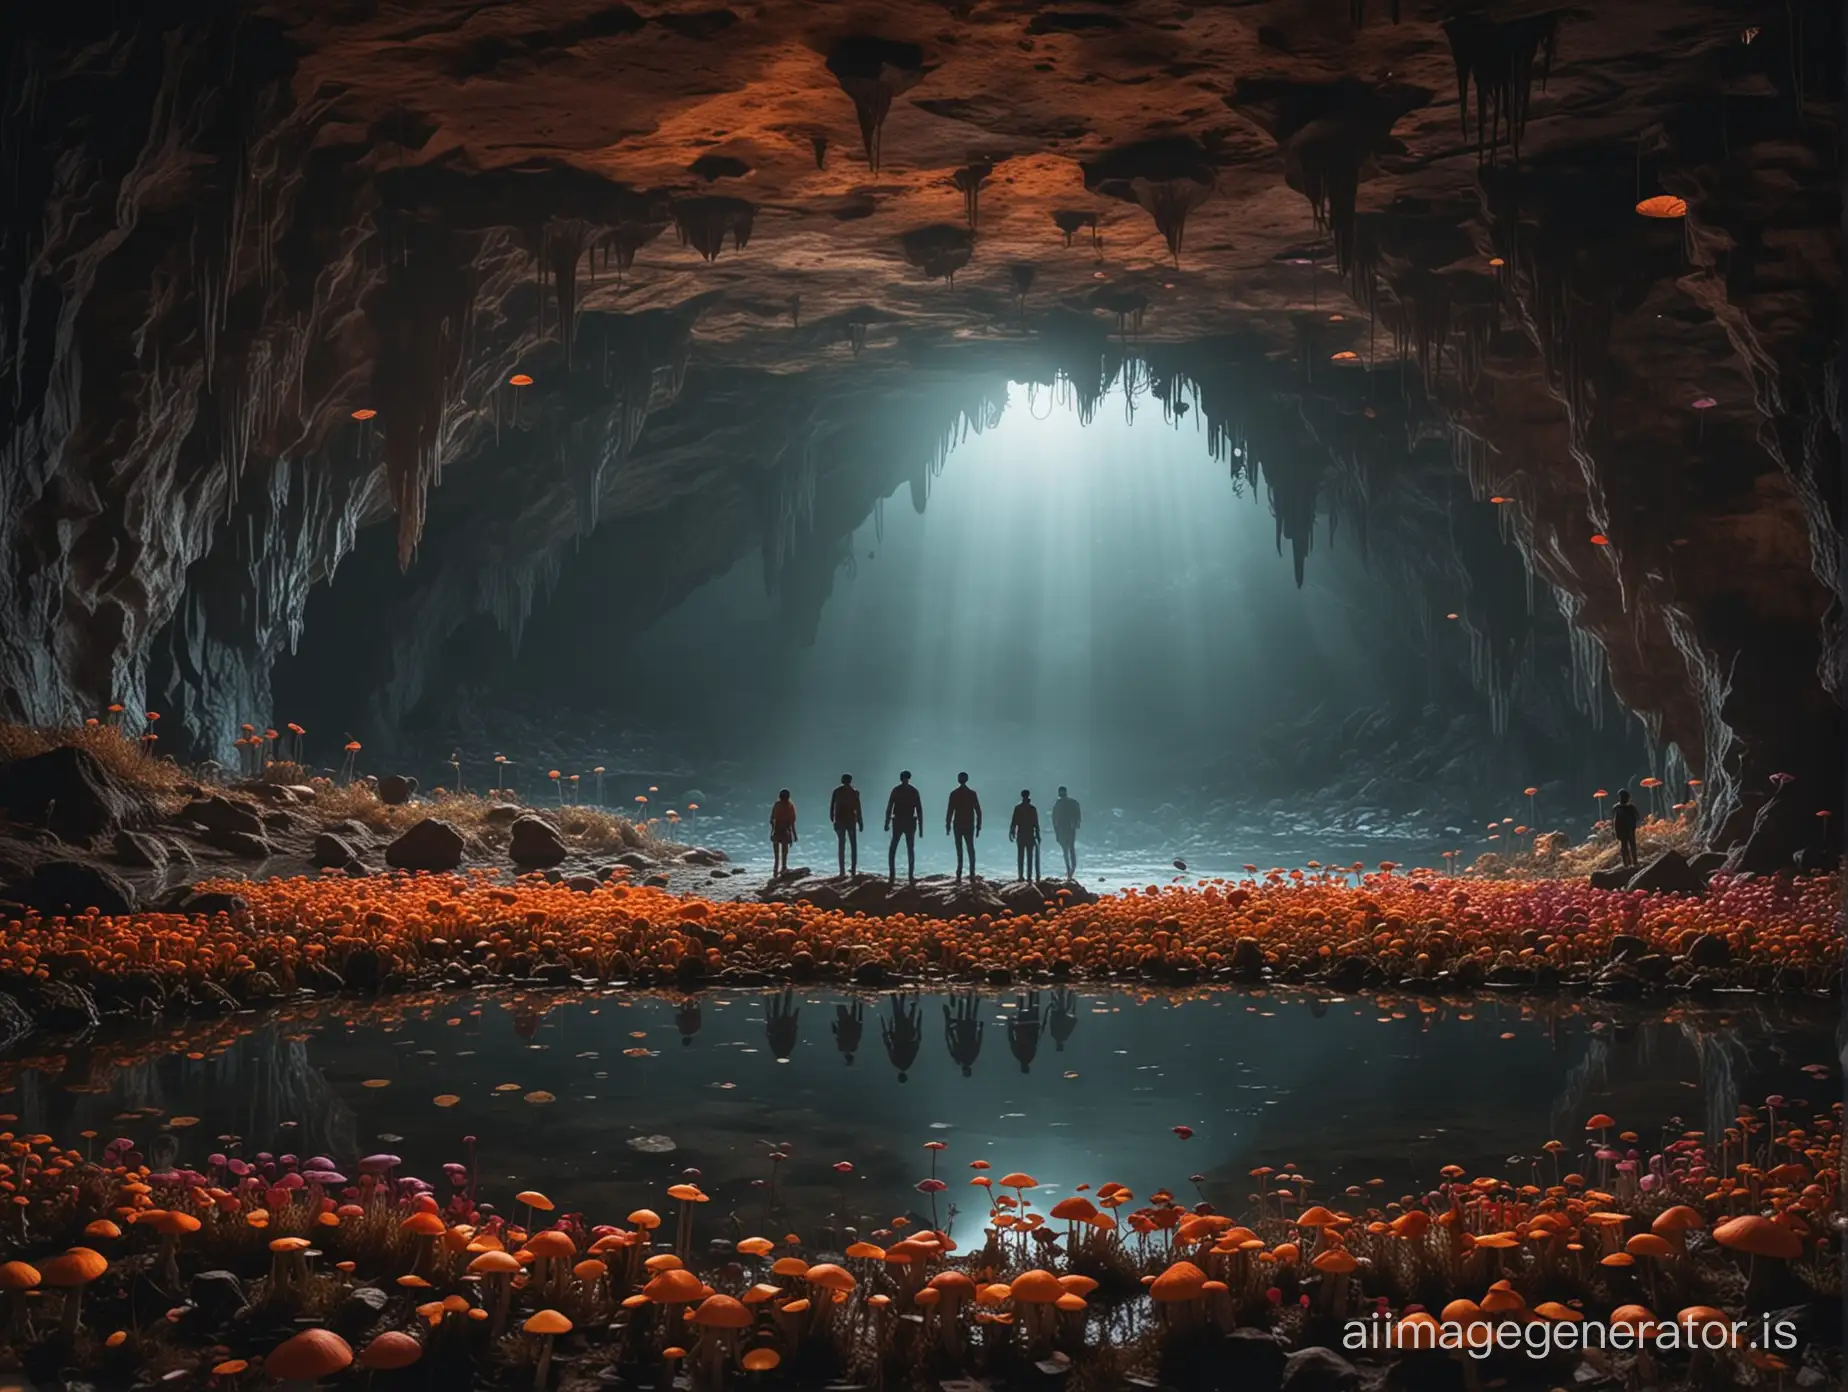 silhouettes of people standing on the shore of an underground lake in the middle of a dark cave overgrown with colorful mushrooms, fantasy ,